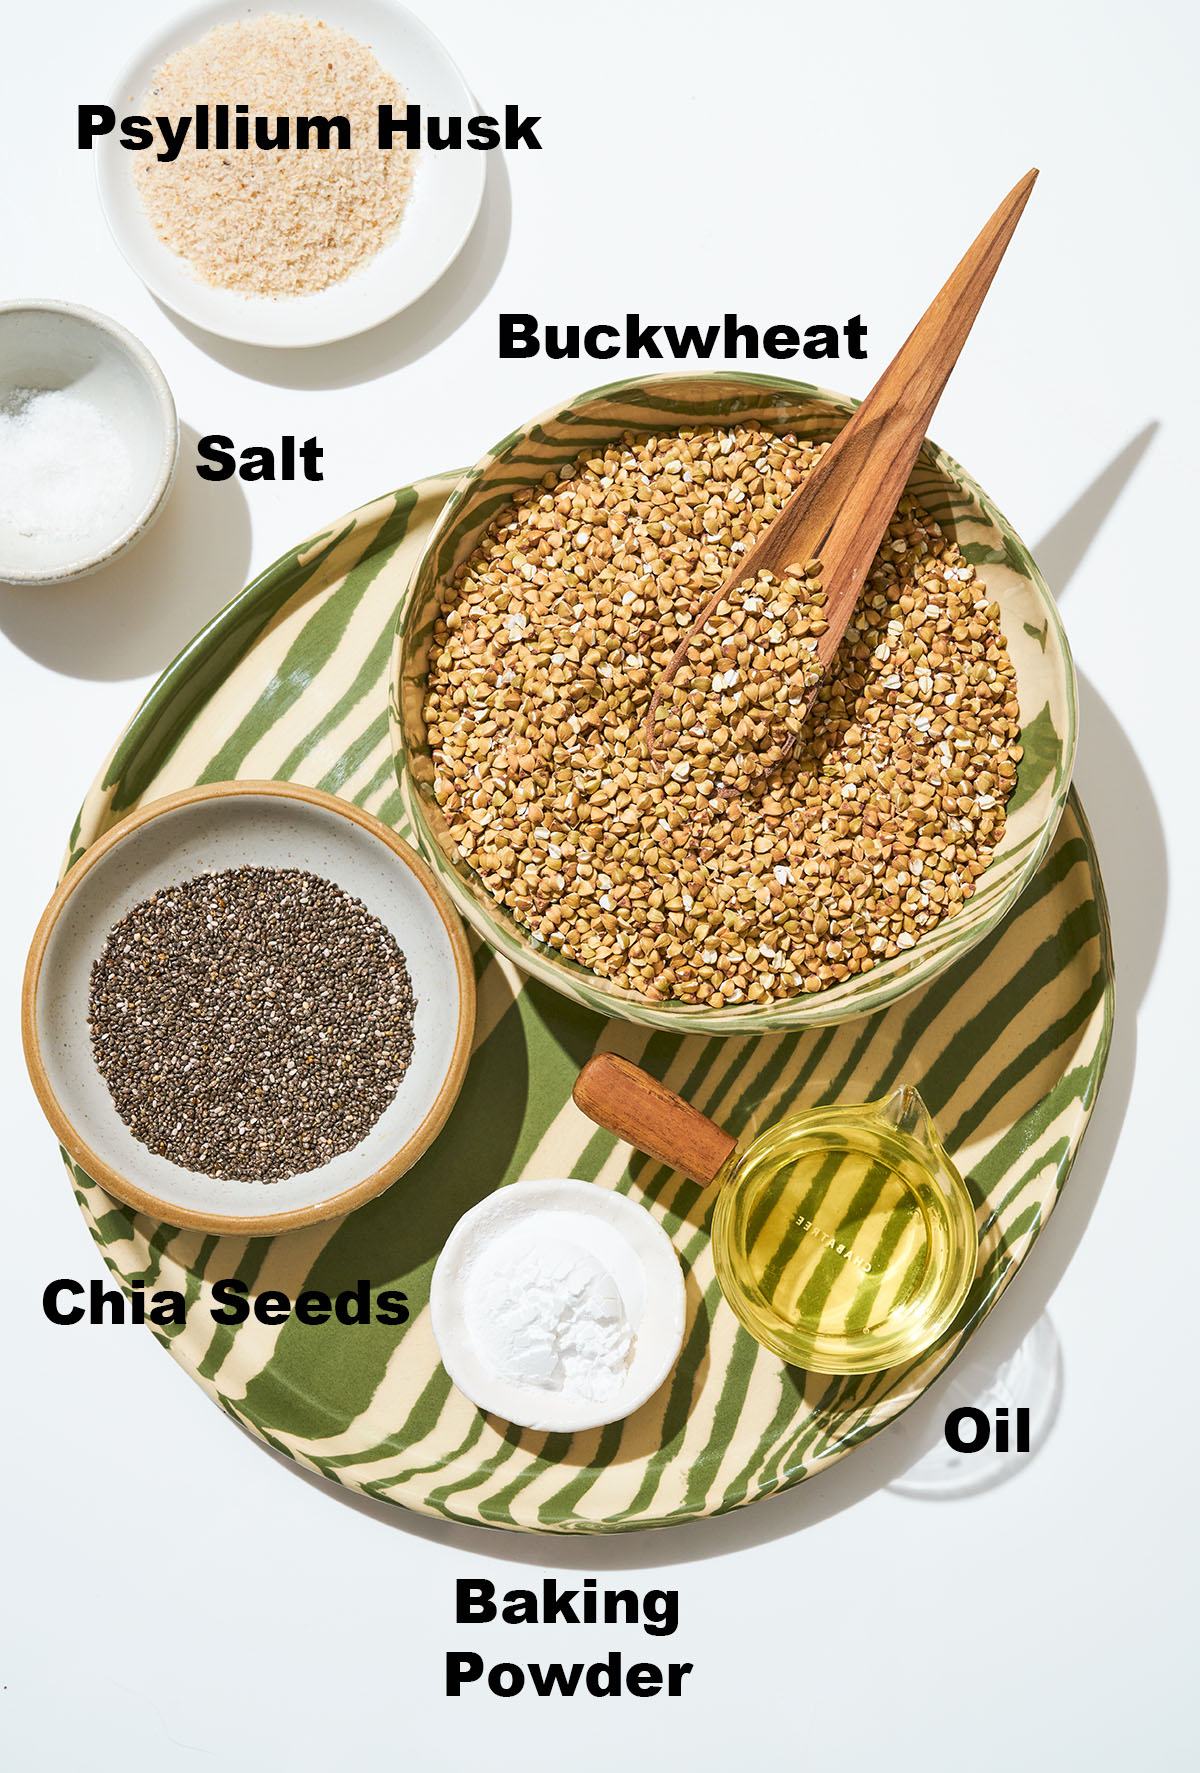 Buckwheat bread ingredients with labels.